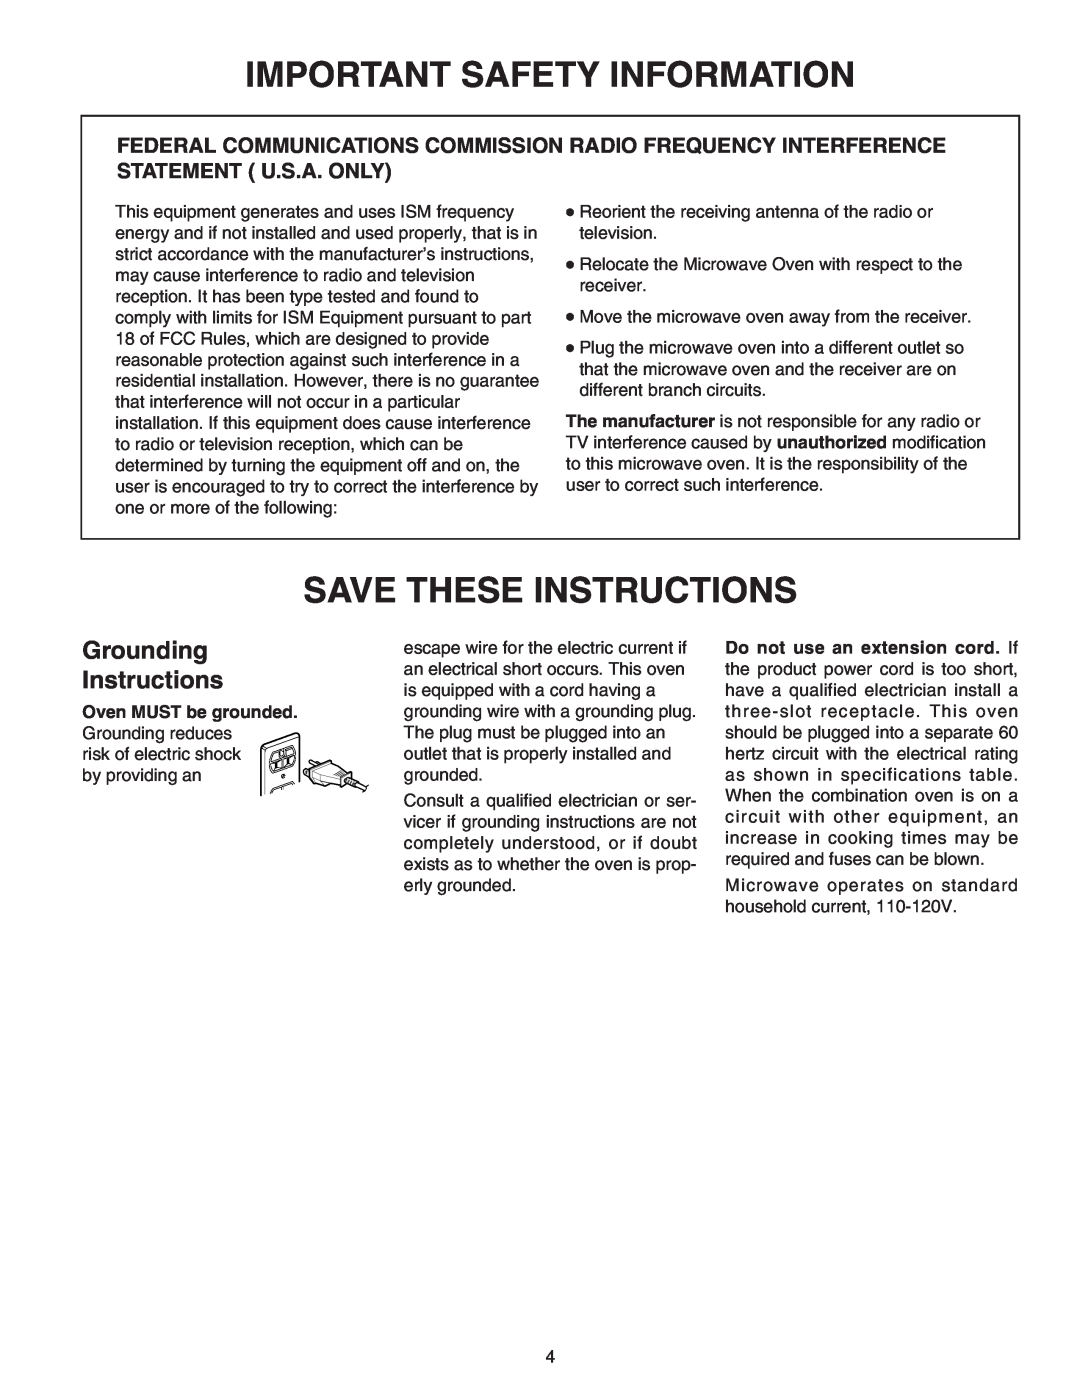 Maytag 8101P641-60 installation instructions Grounding Instructions, Important Safety Information, Save These Instructions 